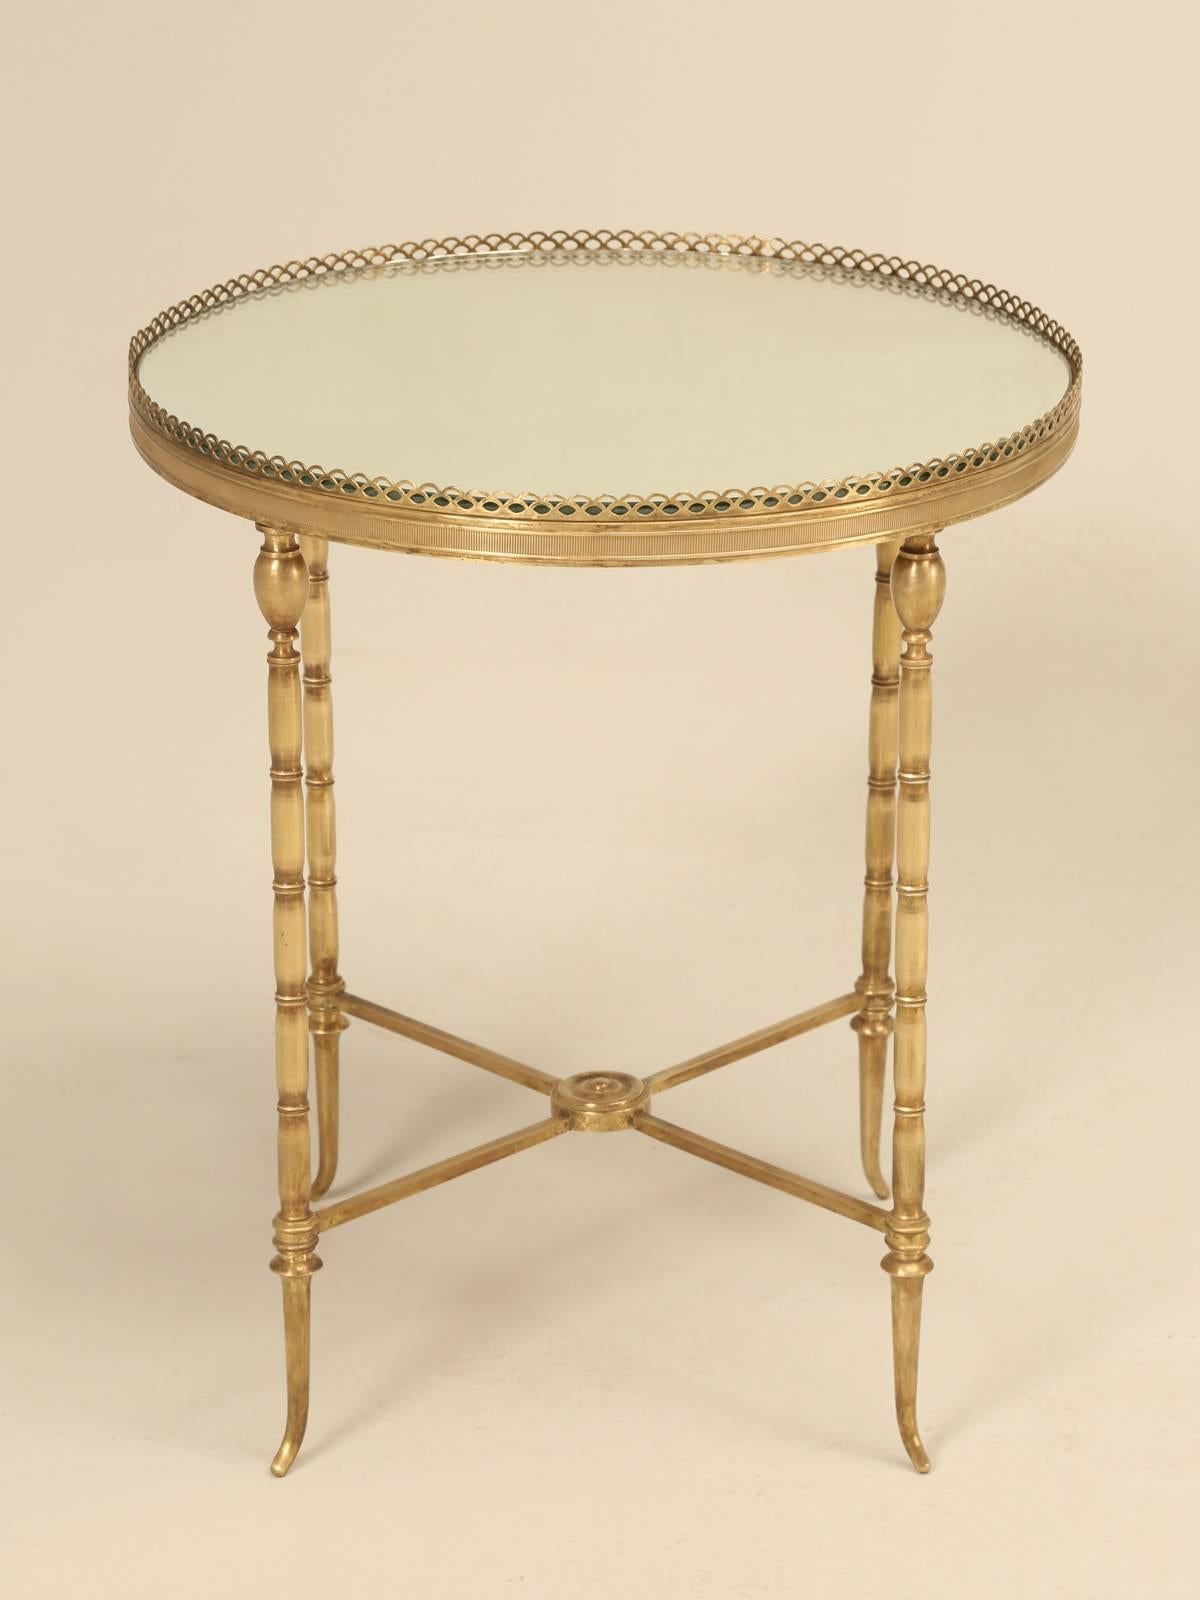 Tres petite solid brass and mirror drink or side table. No previous repairs and finished in polished un-lacquered brass. 

Height provided does not include the 1/4